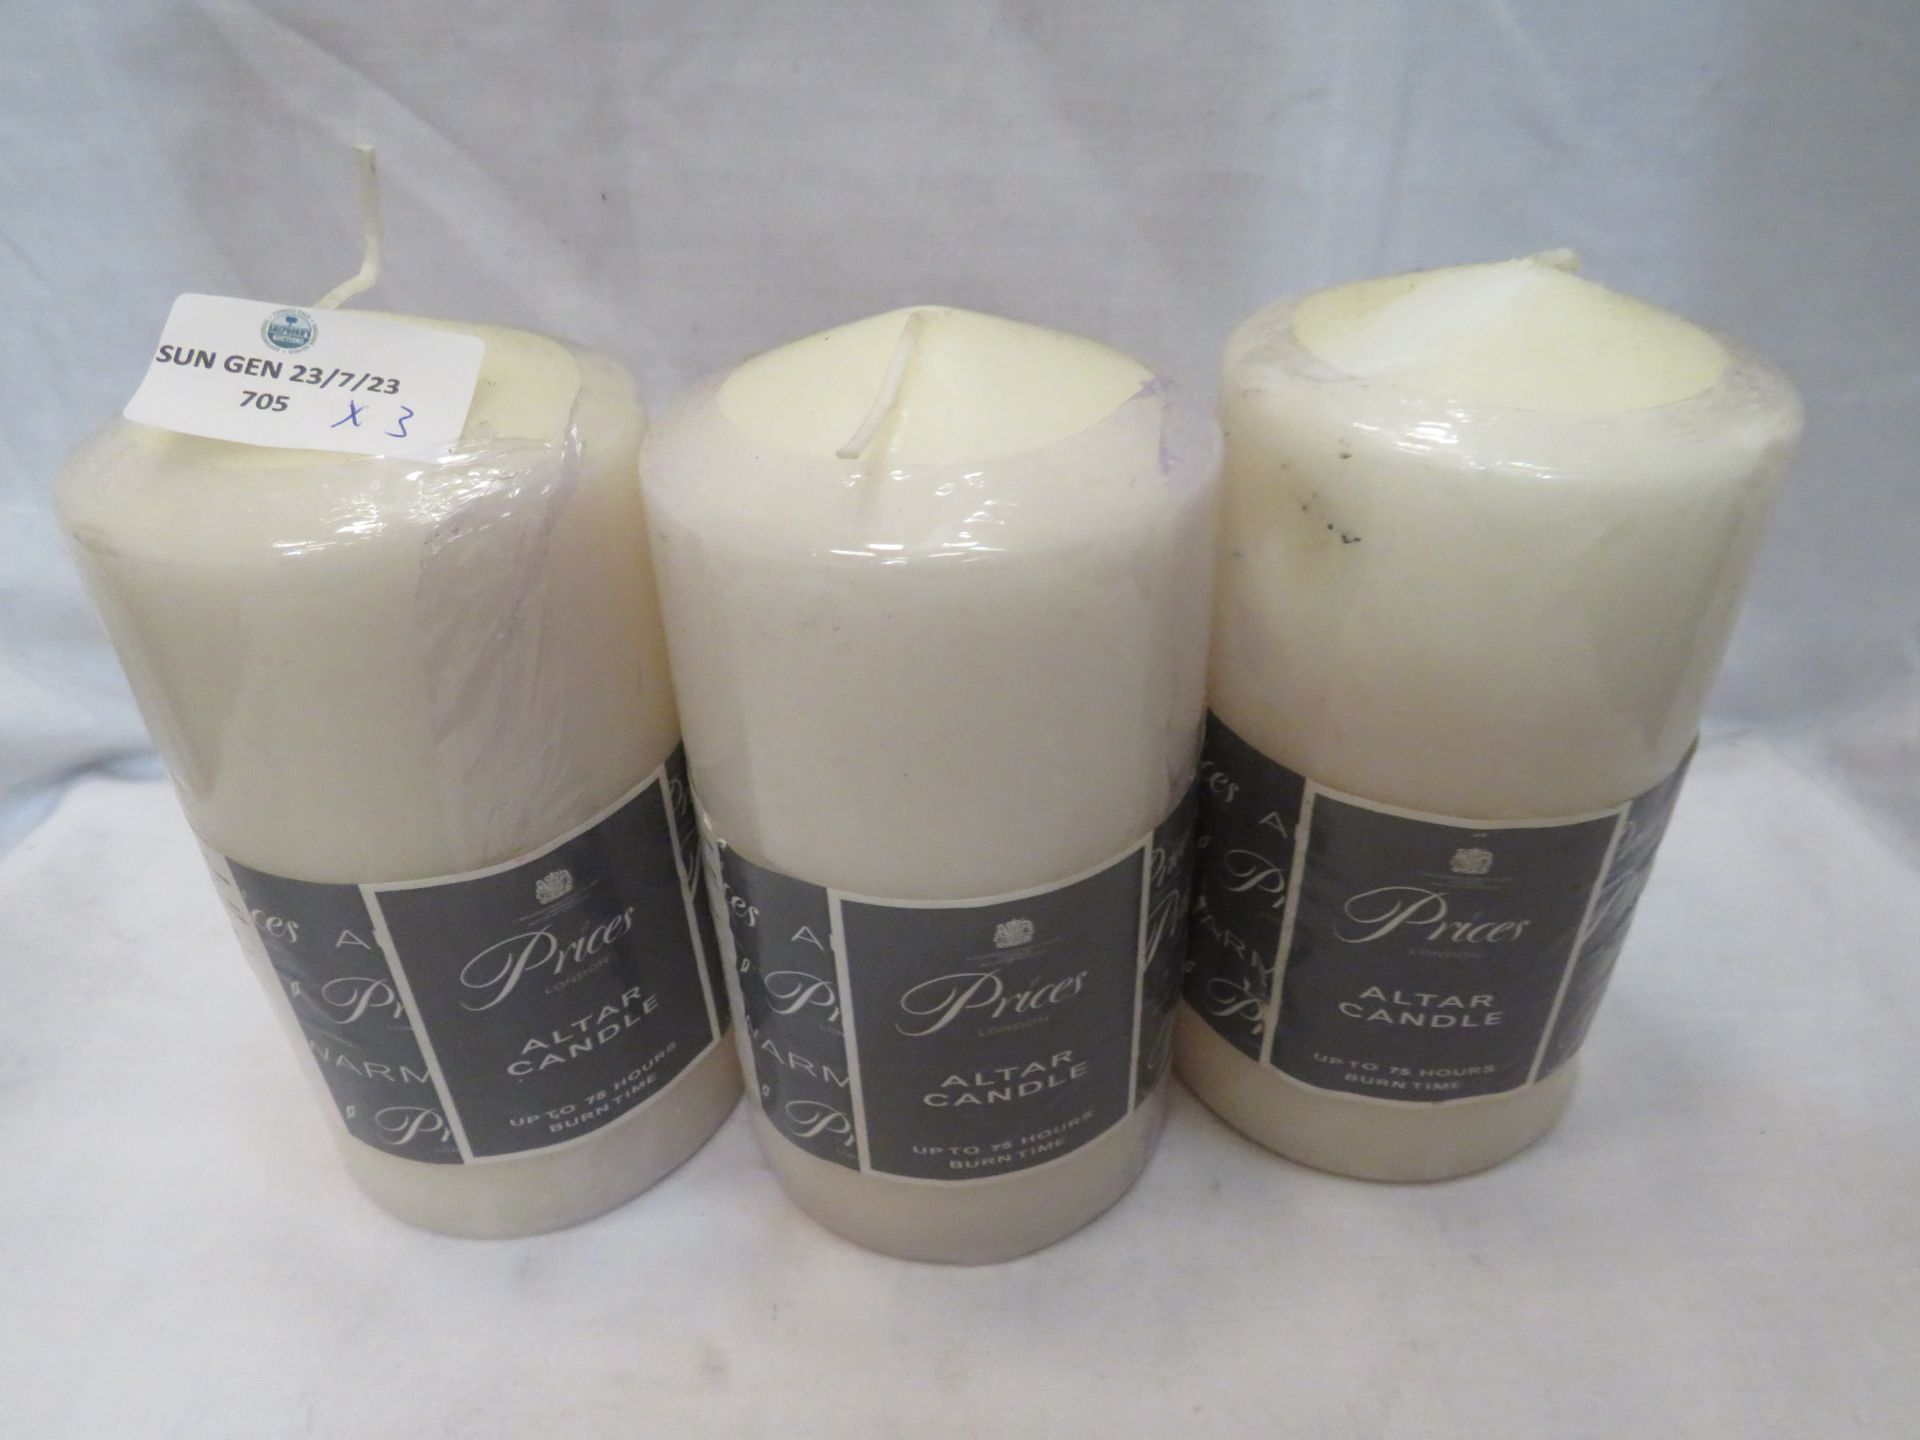 3 X Altar Candles All ^" X 3" Each Candle Has Up To 75HRS Burning Time New